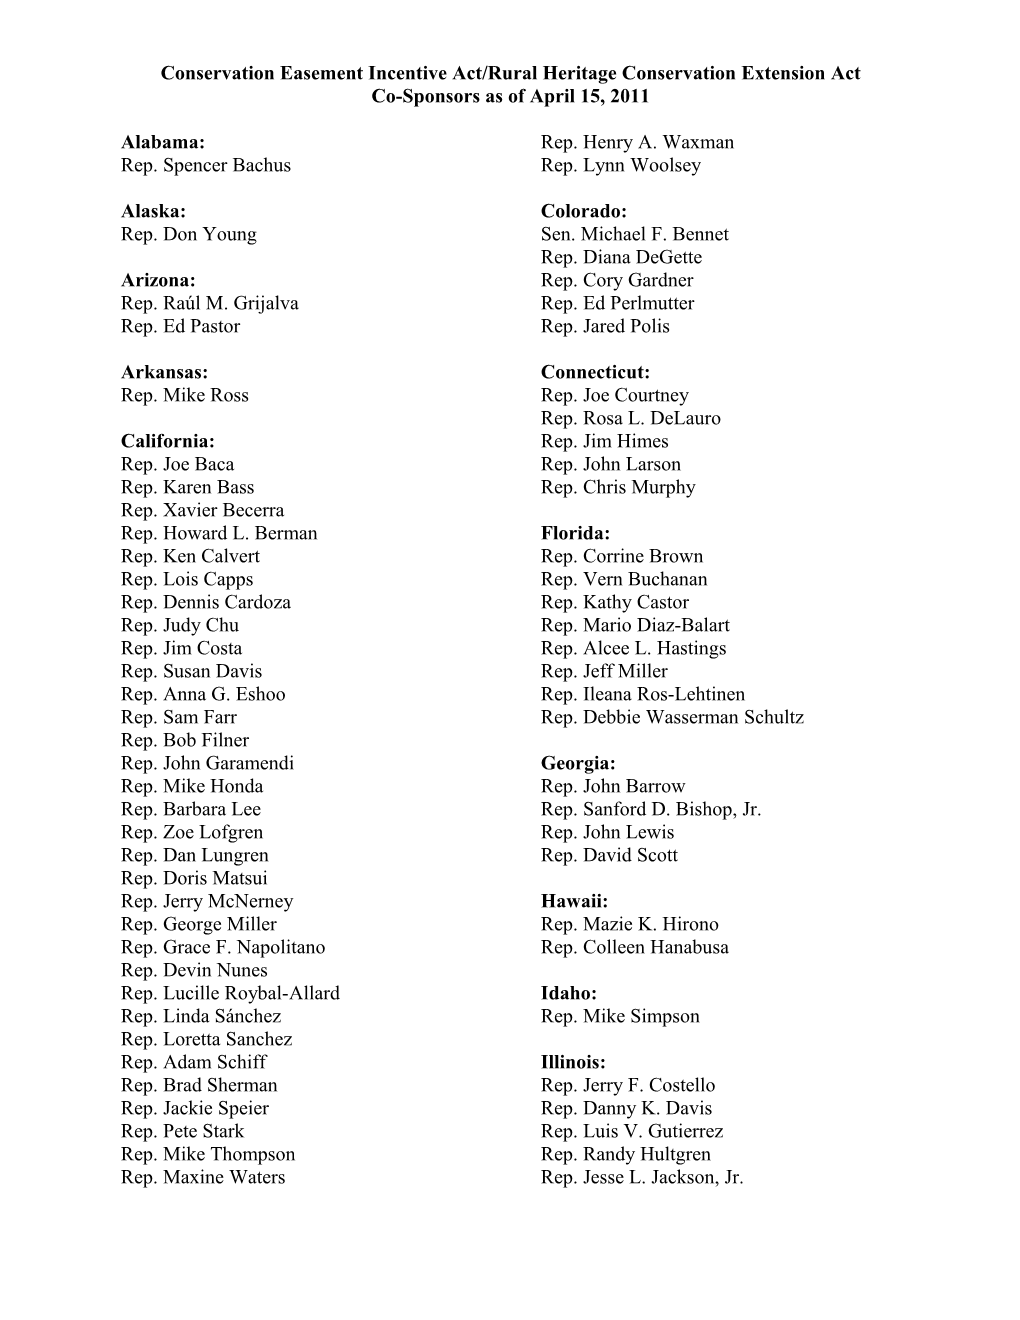 House Signers As of March 8, 2010